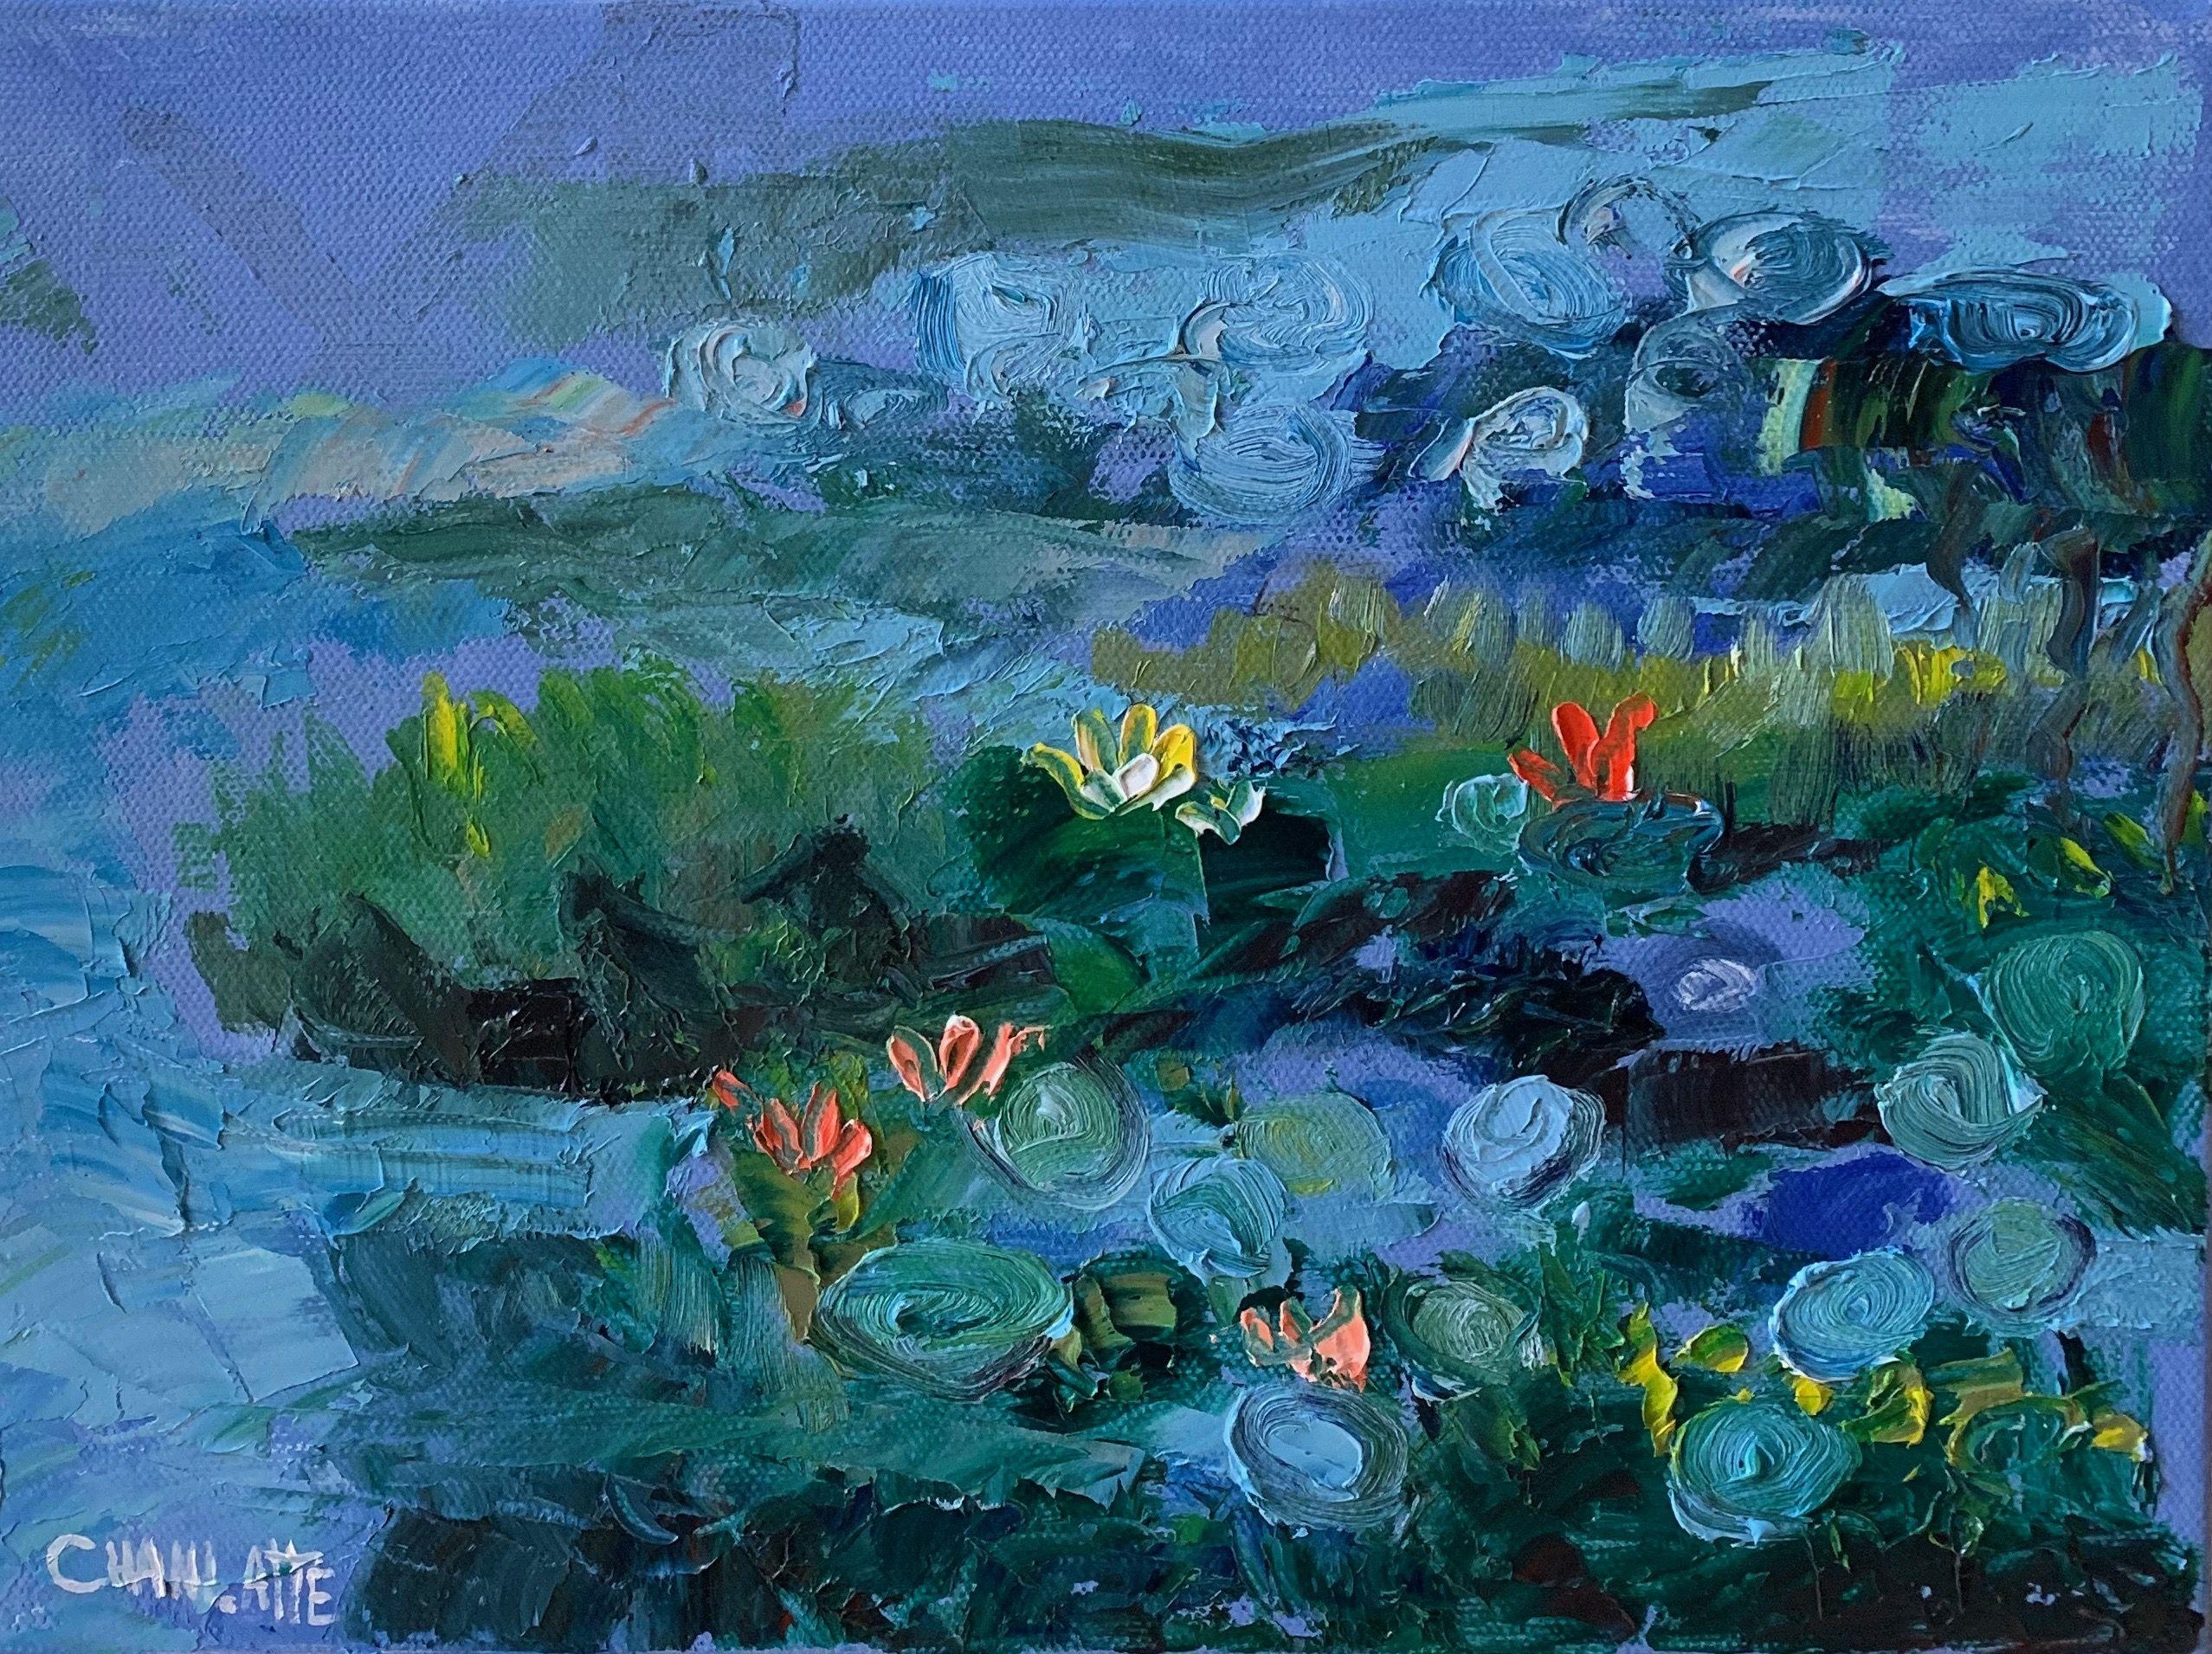 Marino Chanlatte Abstract Painting - Water lilies 14, Painting, Oil on Canvas